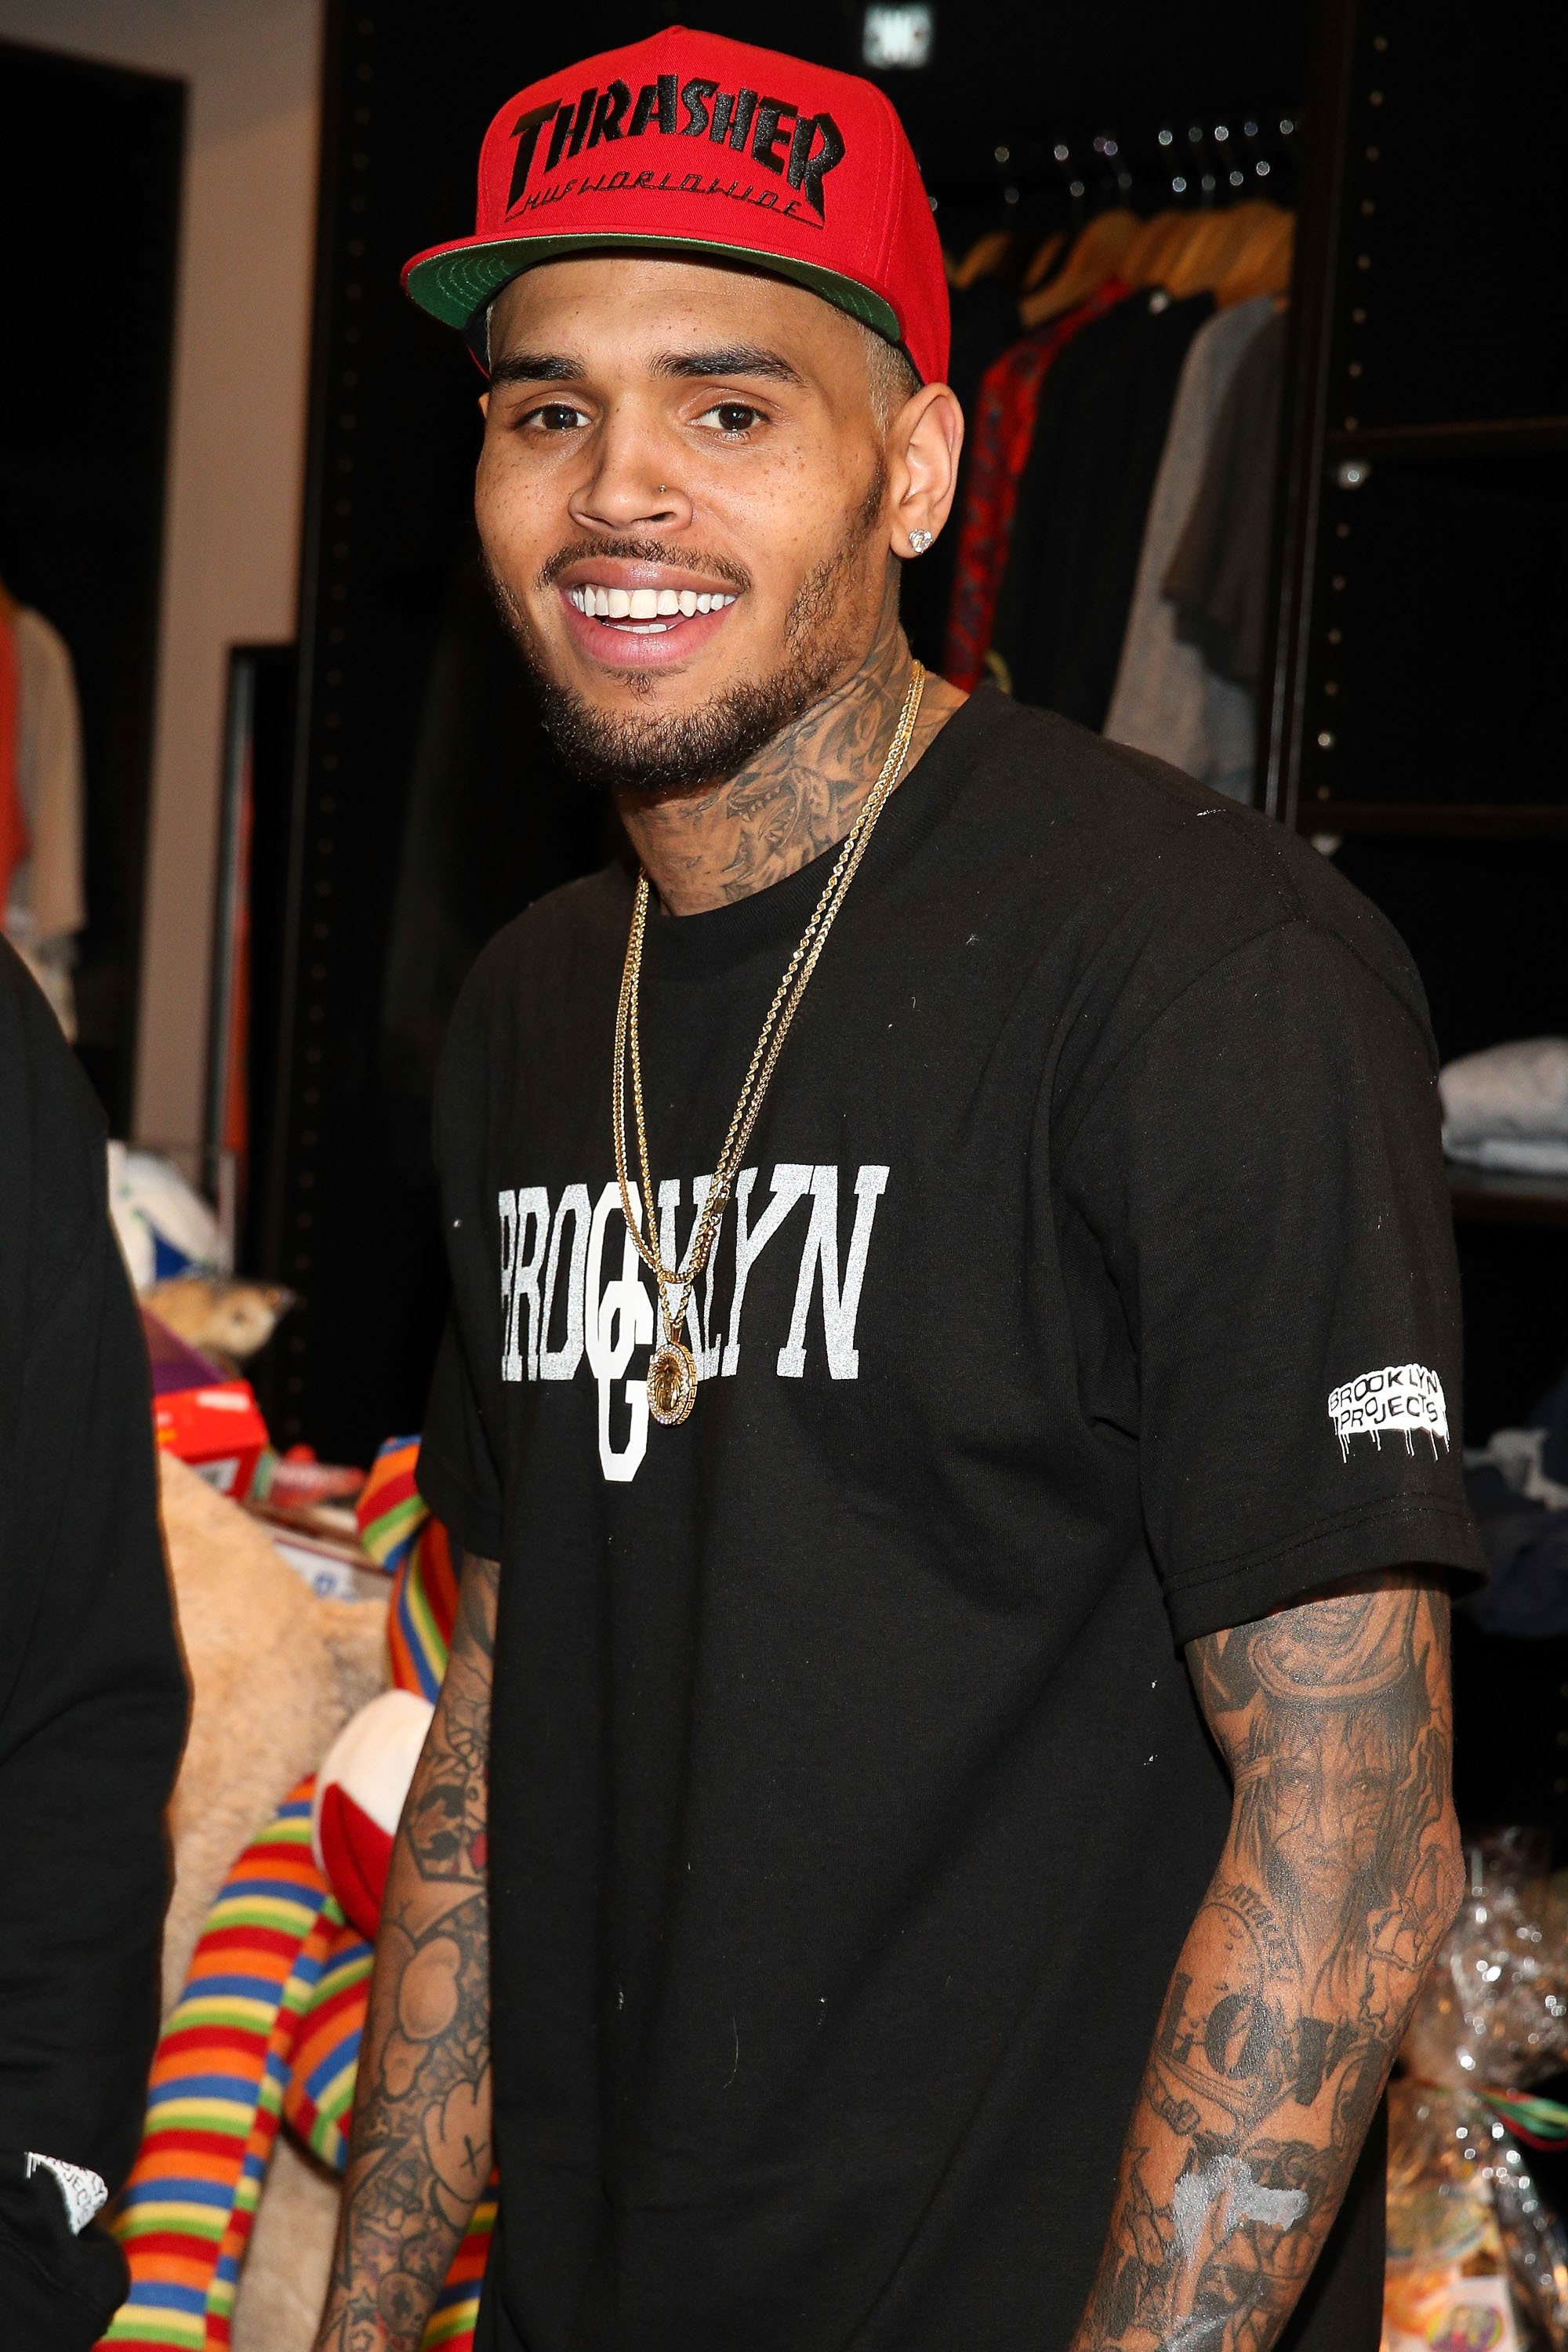 Chris Brown in Los Angeles, California on December 22, 2013 | Photo: Getty Images